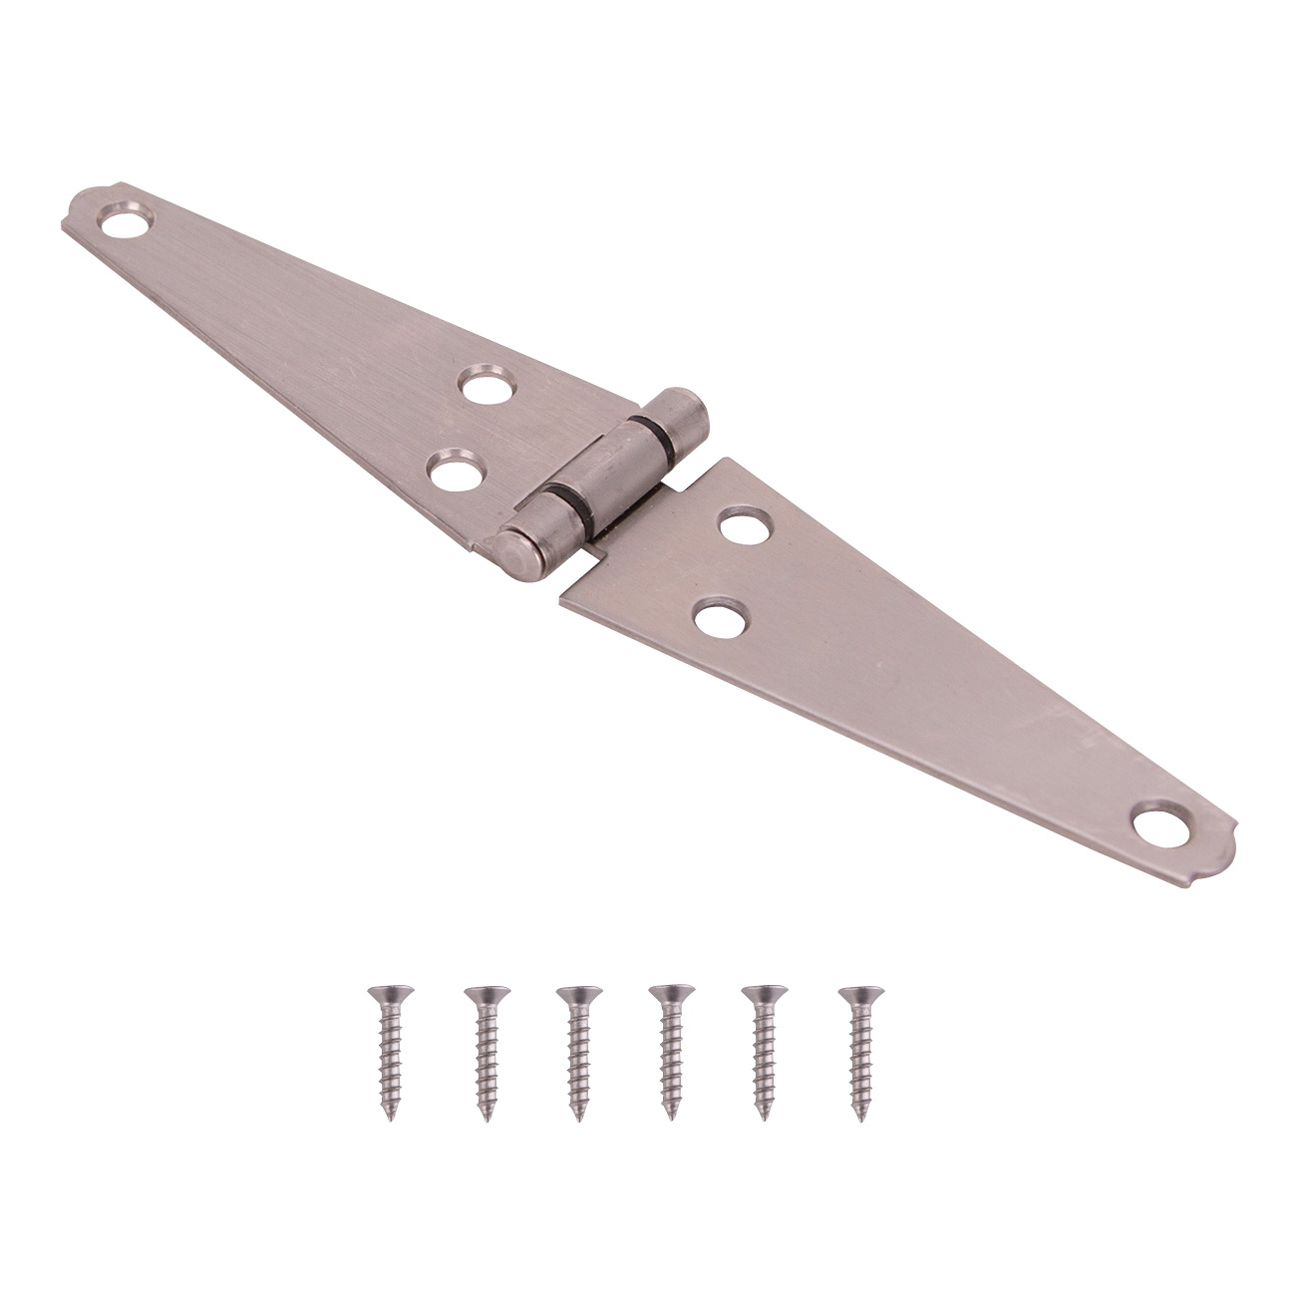 HSH-S04-C1PS Strap Hinge, 2 mm Thick Leaf, Brushed Stainless Steel, 180 Range of Motion